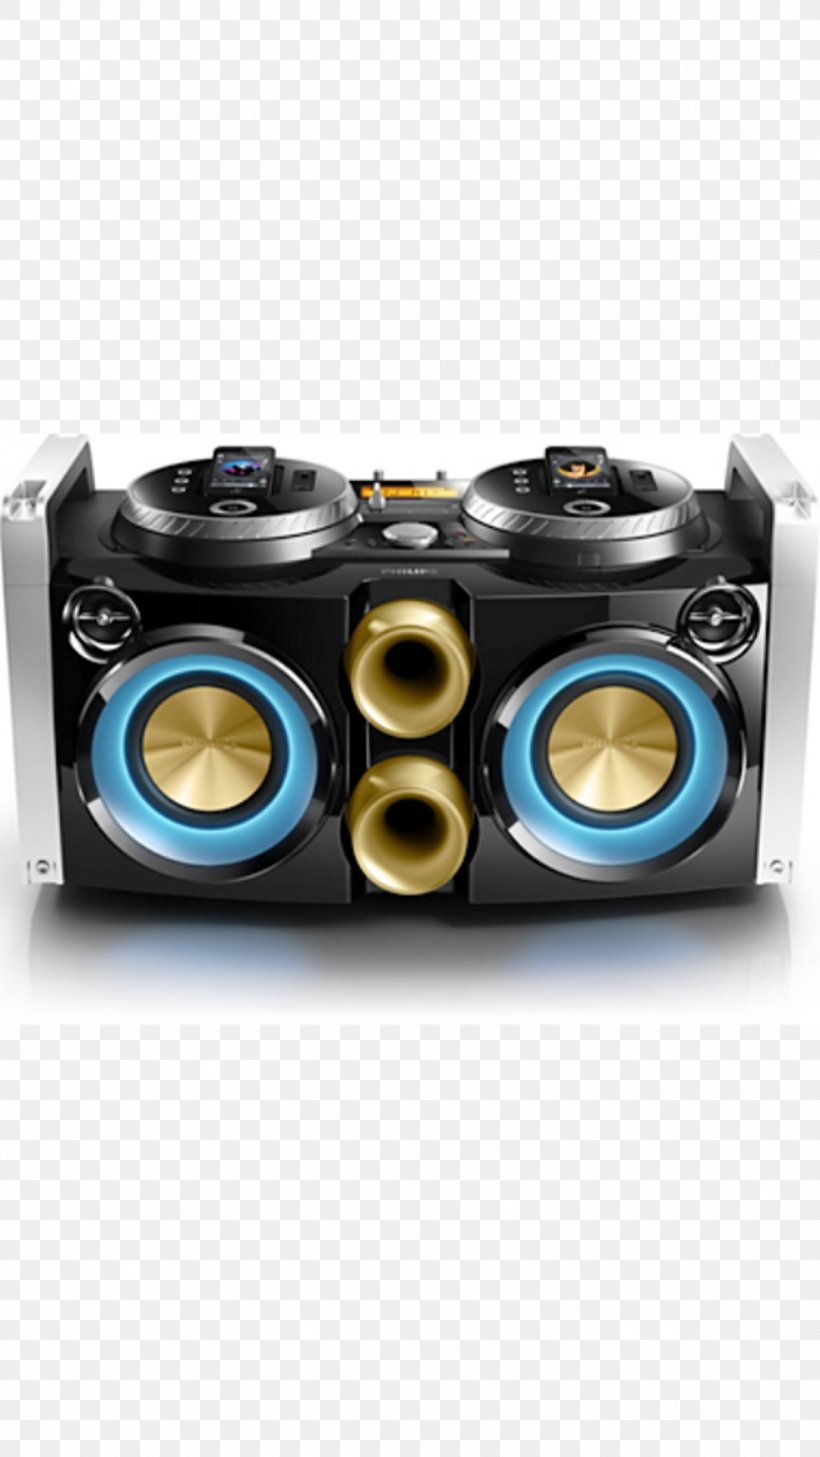 High Fidelity Philips Loudspeaker Subwoofer Boombox, PNG, 1080x1920px, High Fidelity, Audio, Boombox, Car Subwoofer, Disc Jockey Download Free